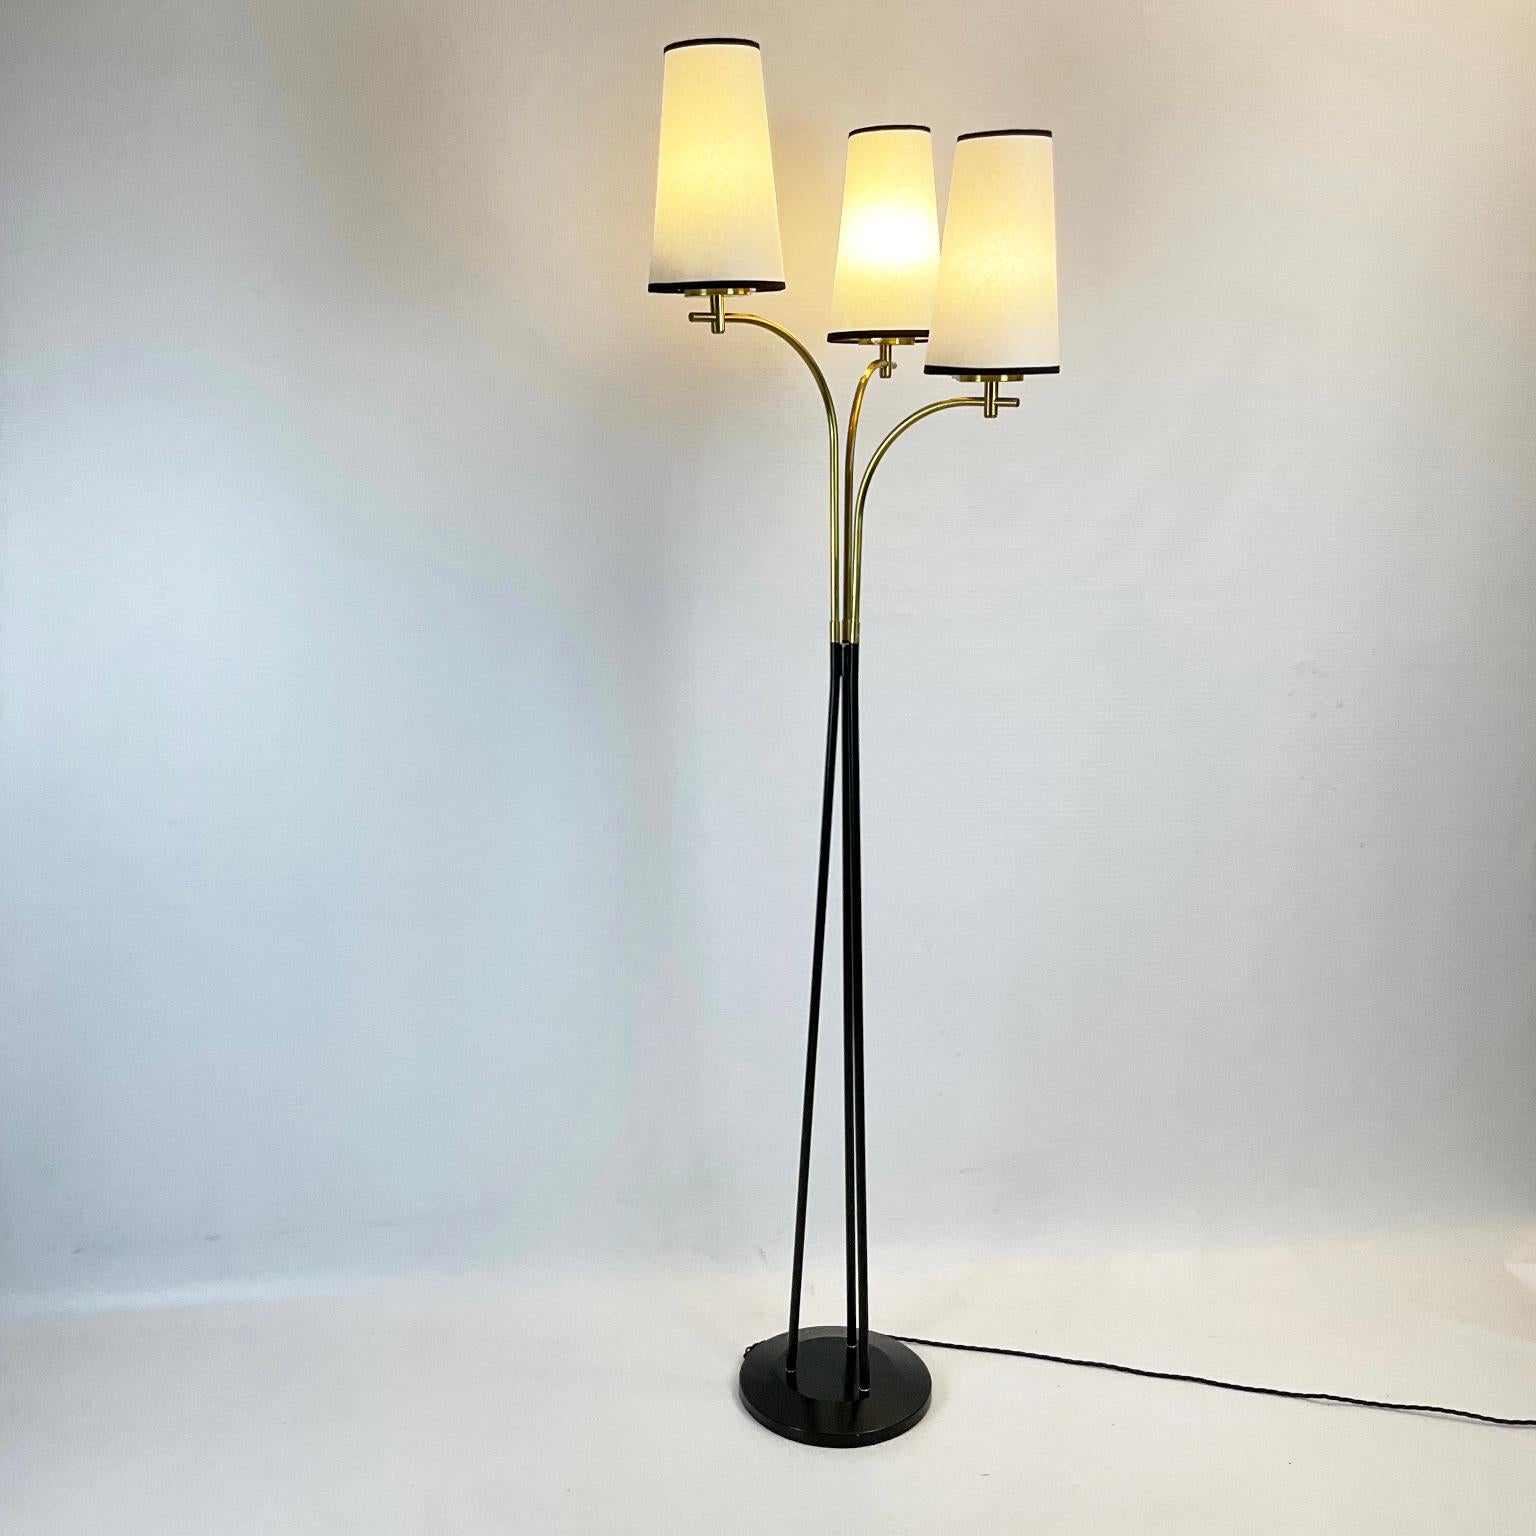 Mid-Century Modern 1950s Floor Lamp Attributed to Maison Lunel France